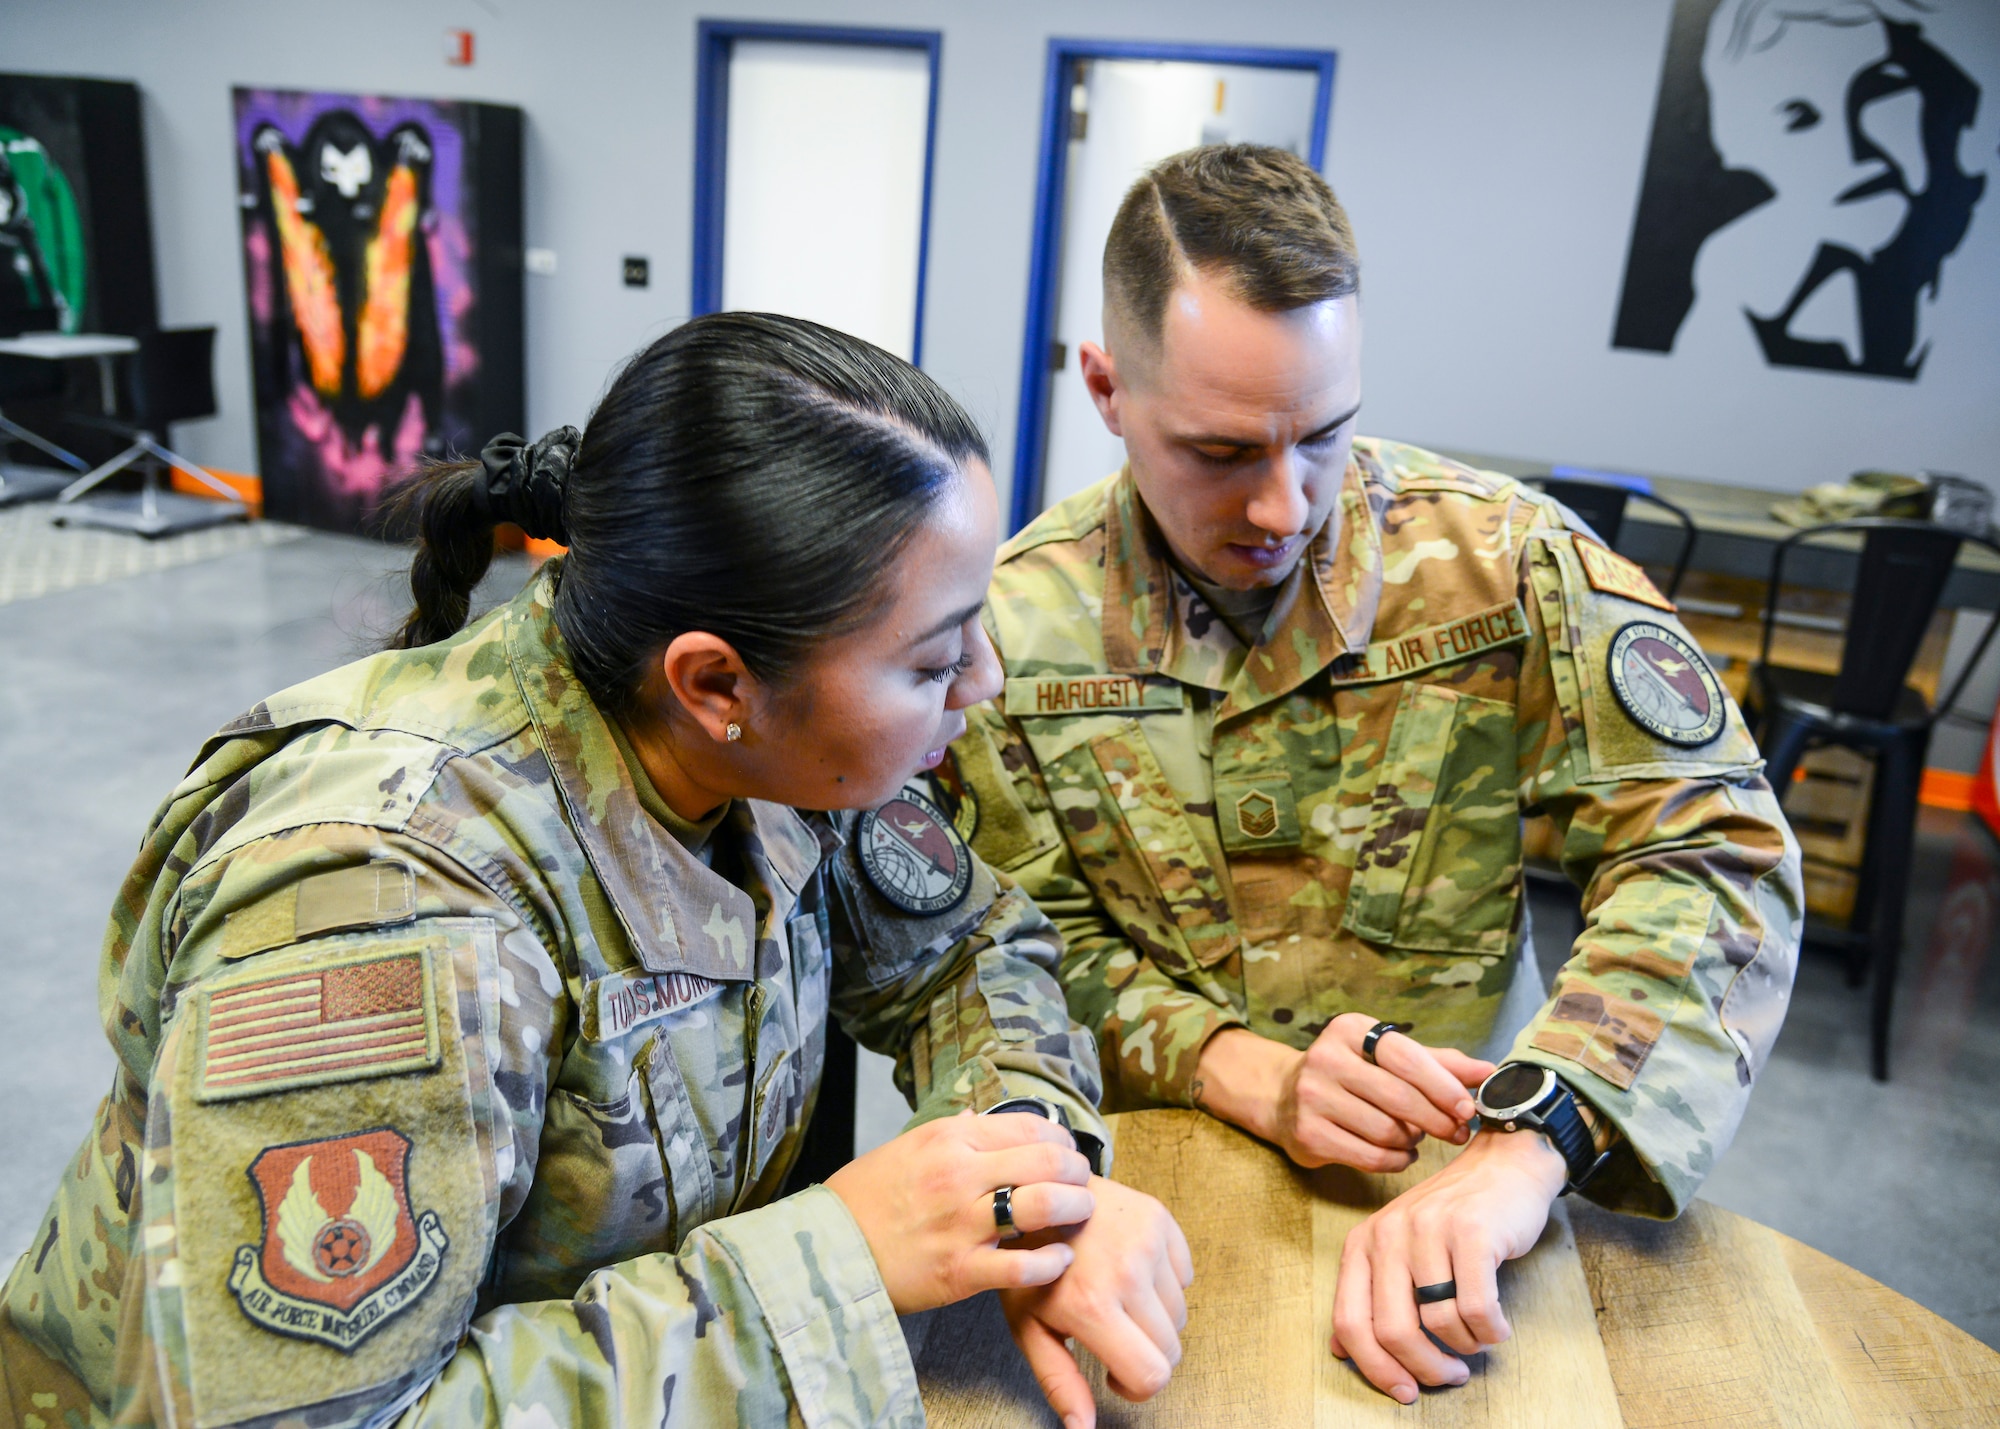 Master Sgt. Chad Hardesty, Ellington Airman Leadership School commandant, and Tech. Sgt. Carmen Turcios Munoz, ALS instructor, compare biometric data from their smartwatches at Edwards Air Force Base, California. The watches provide Airmen biofeedback to improve physical exercise, their sleep, their timing of when to tackle which tasks and other benefits. (Air Force photo by Gary Hatch)